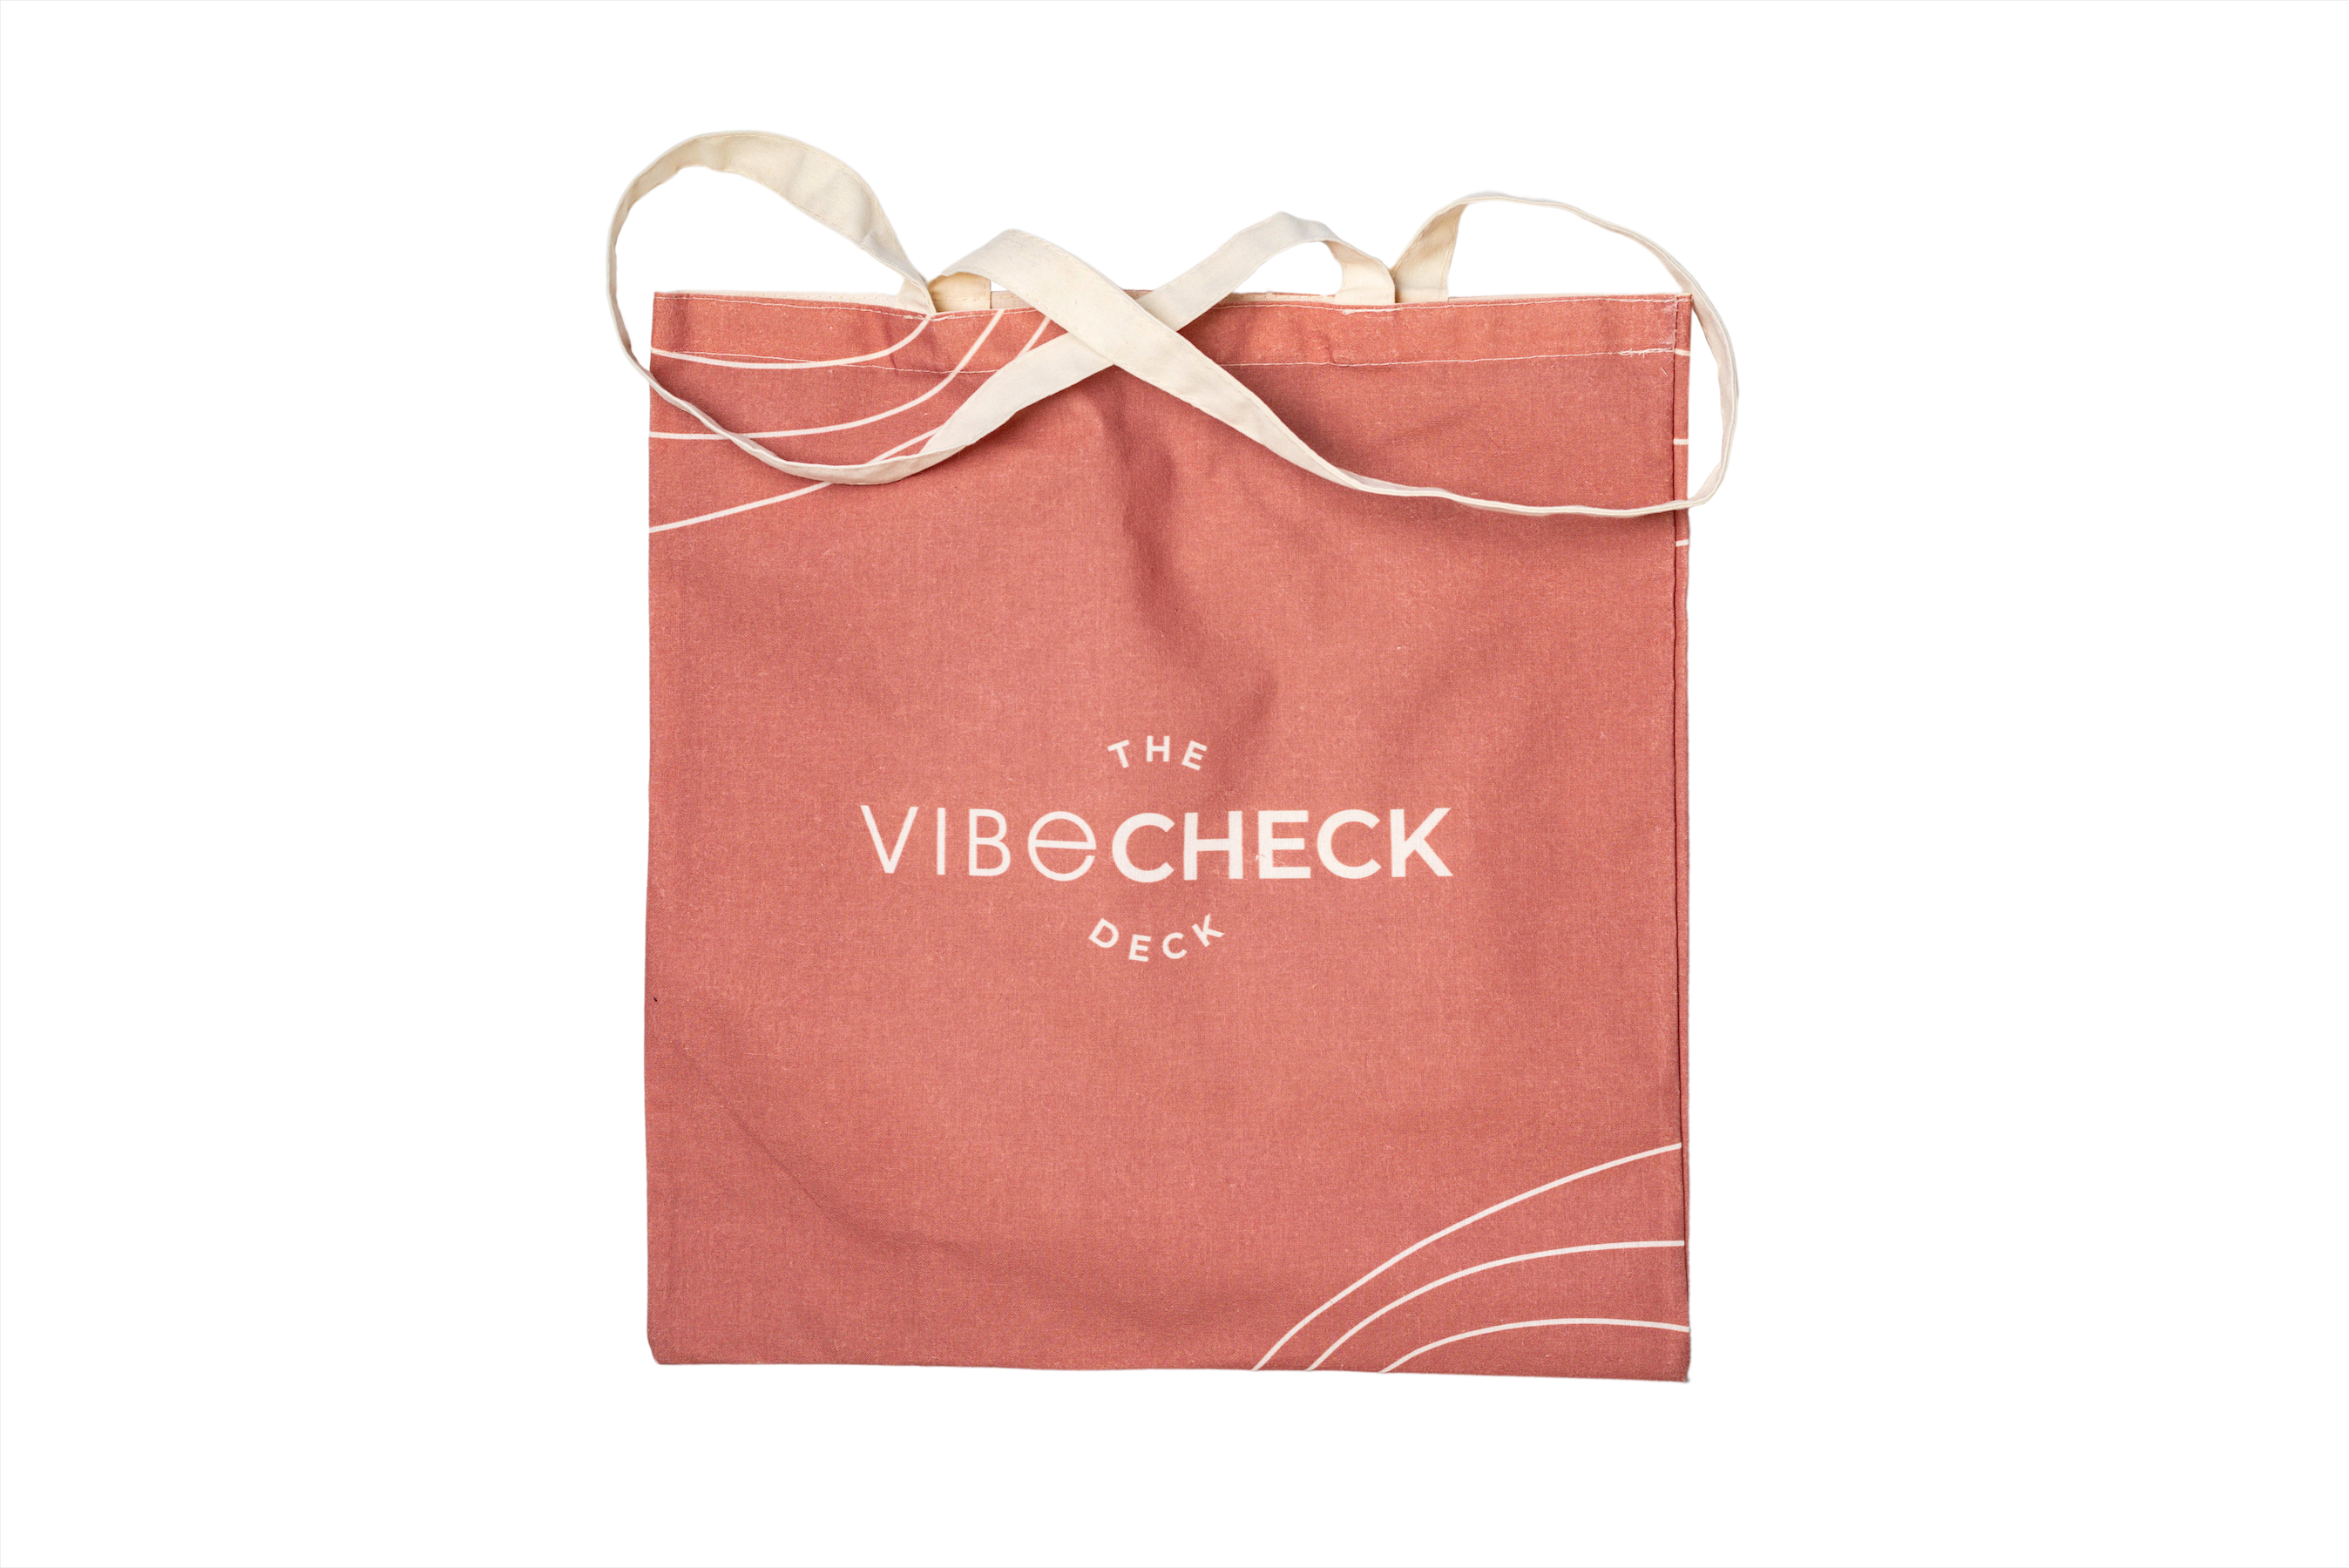 TOTES! Carry the Vibe!